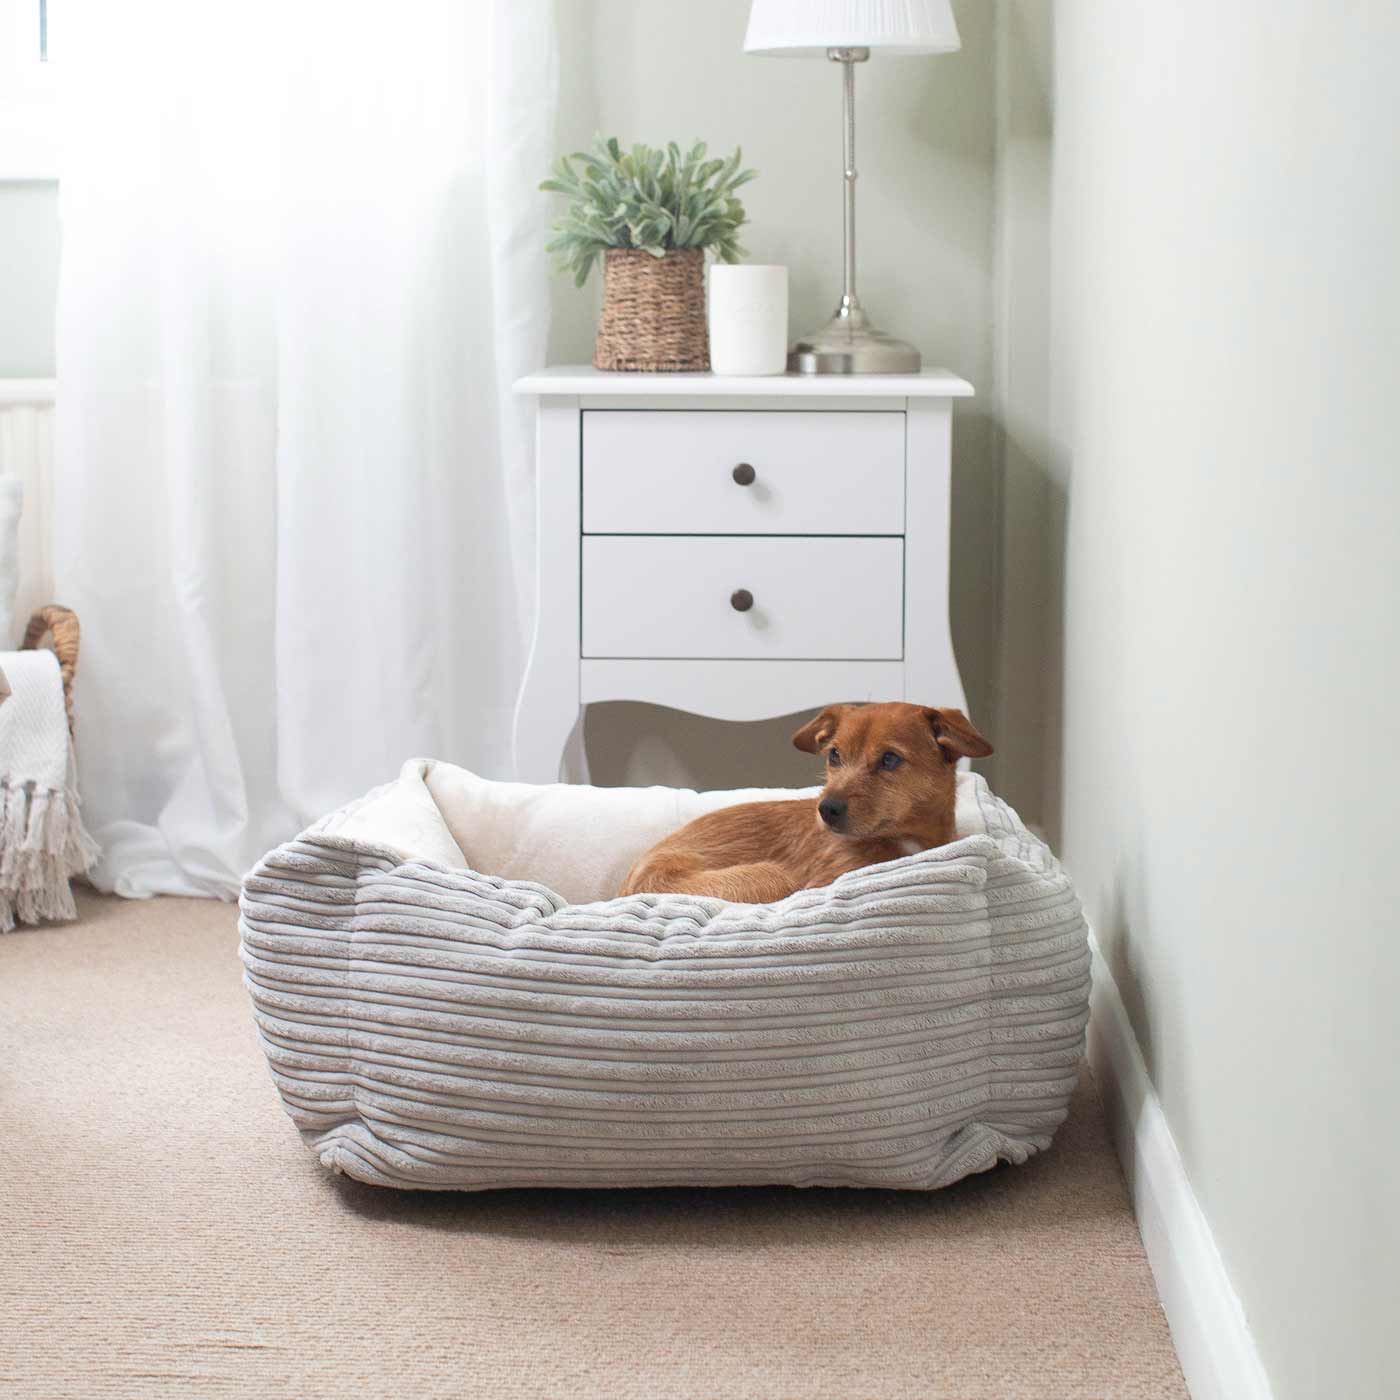 [color:light grey plush] Super Soft, Plush Fabric Essentials Box Bed For Dogs, A Luxury Dog Bed Made Using Sherpa/Fleece To Bring The Perfect Pet Bed For The Ultimate Nap Time! Available Now at Lords & Labradors US